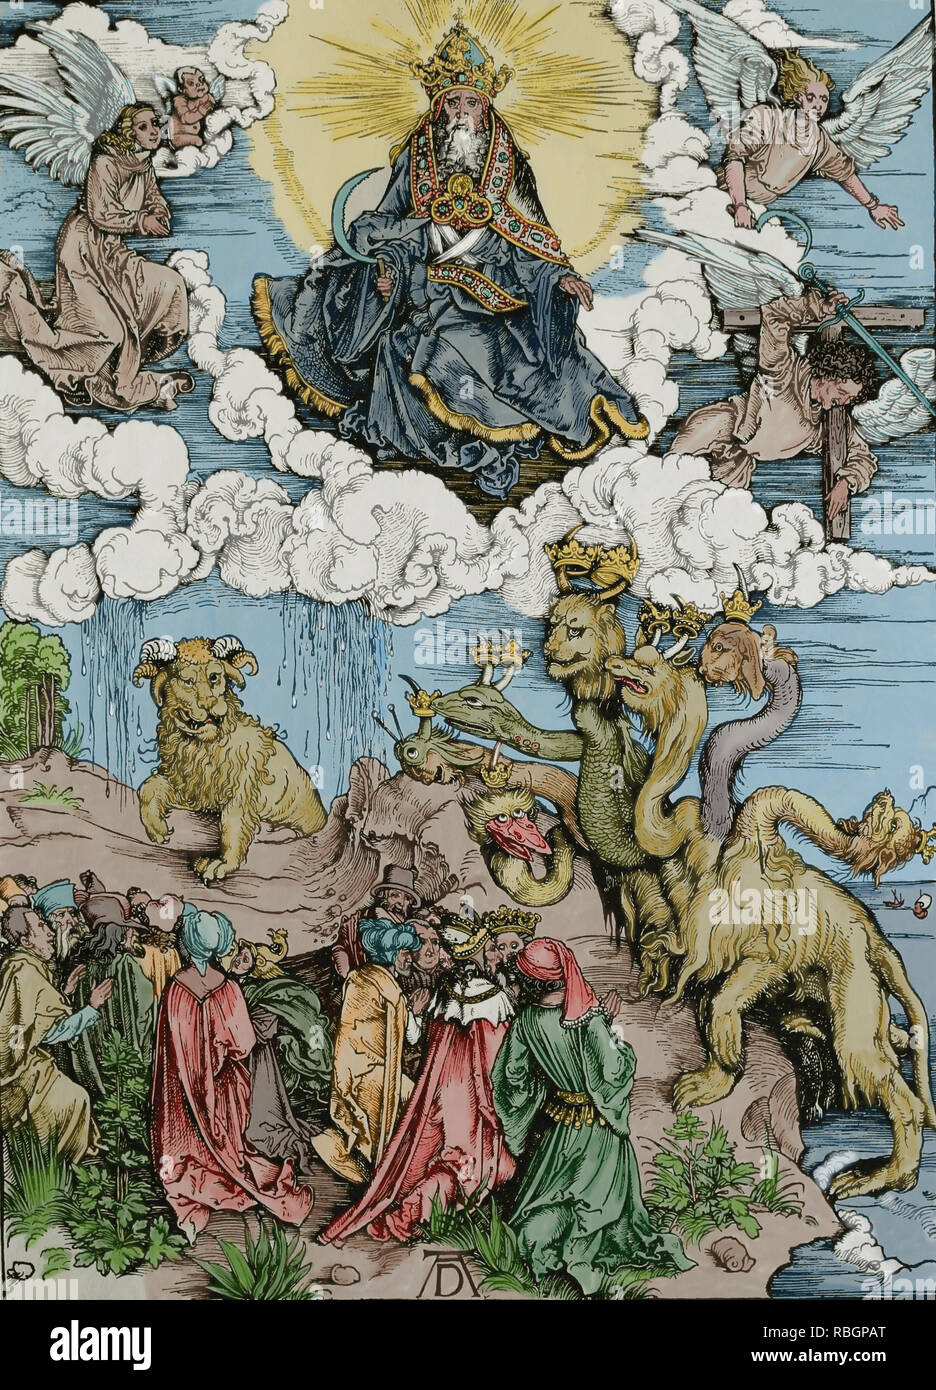 The beast with the lamb's horns and the beast with 7 heads. Apocalypse of Albrecht Durer. 1498. Stock Photo